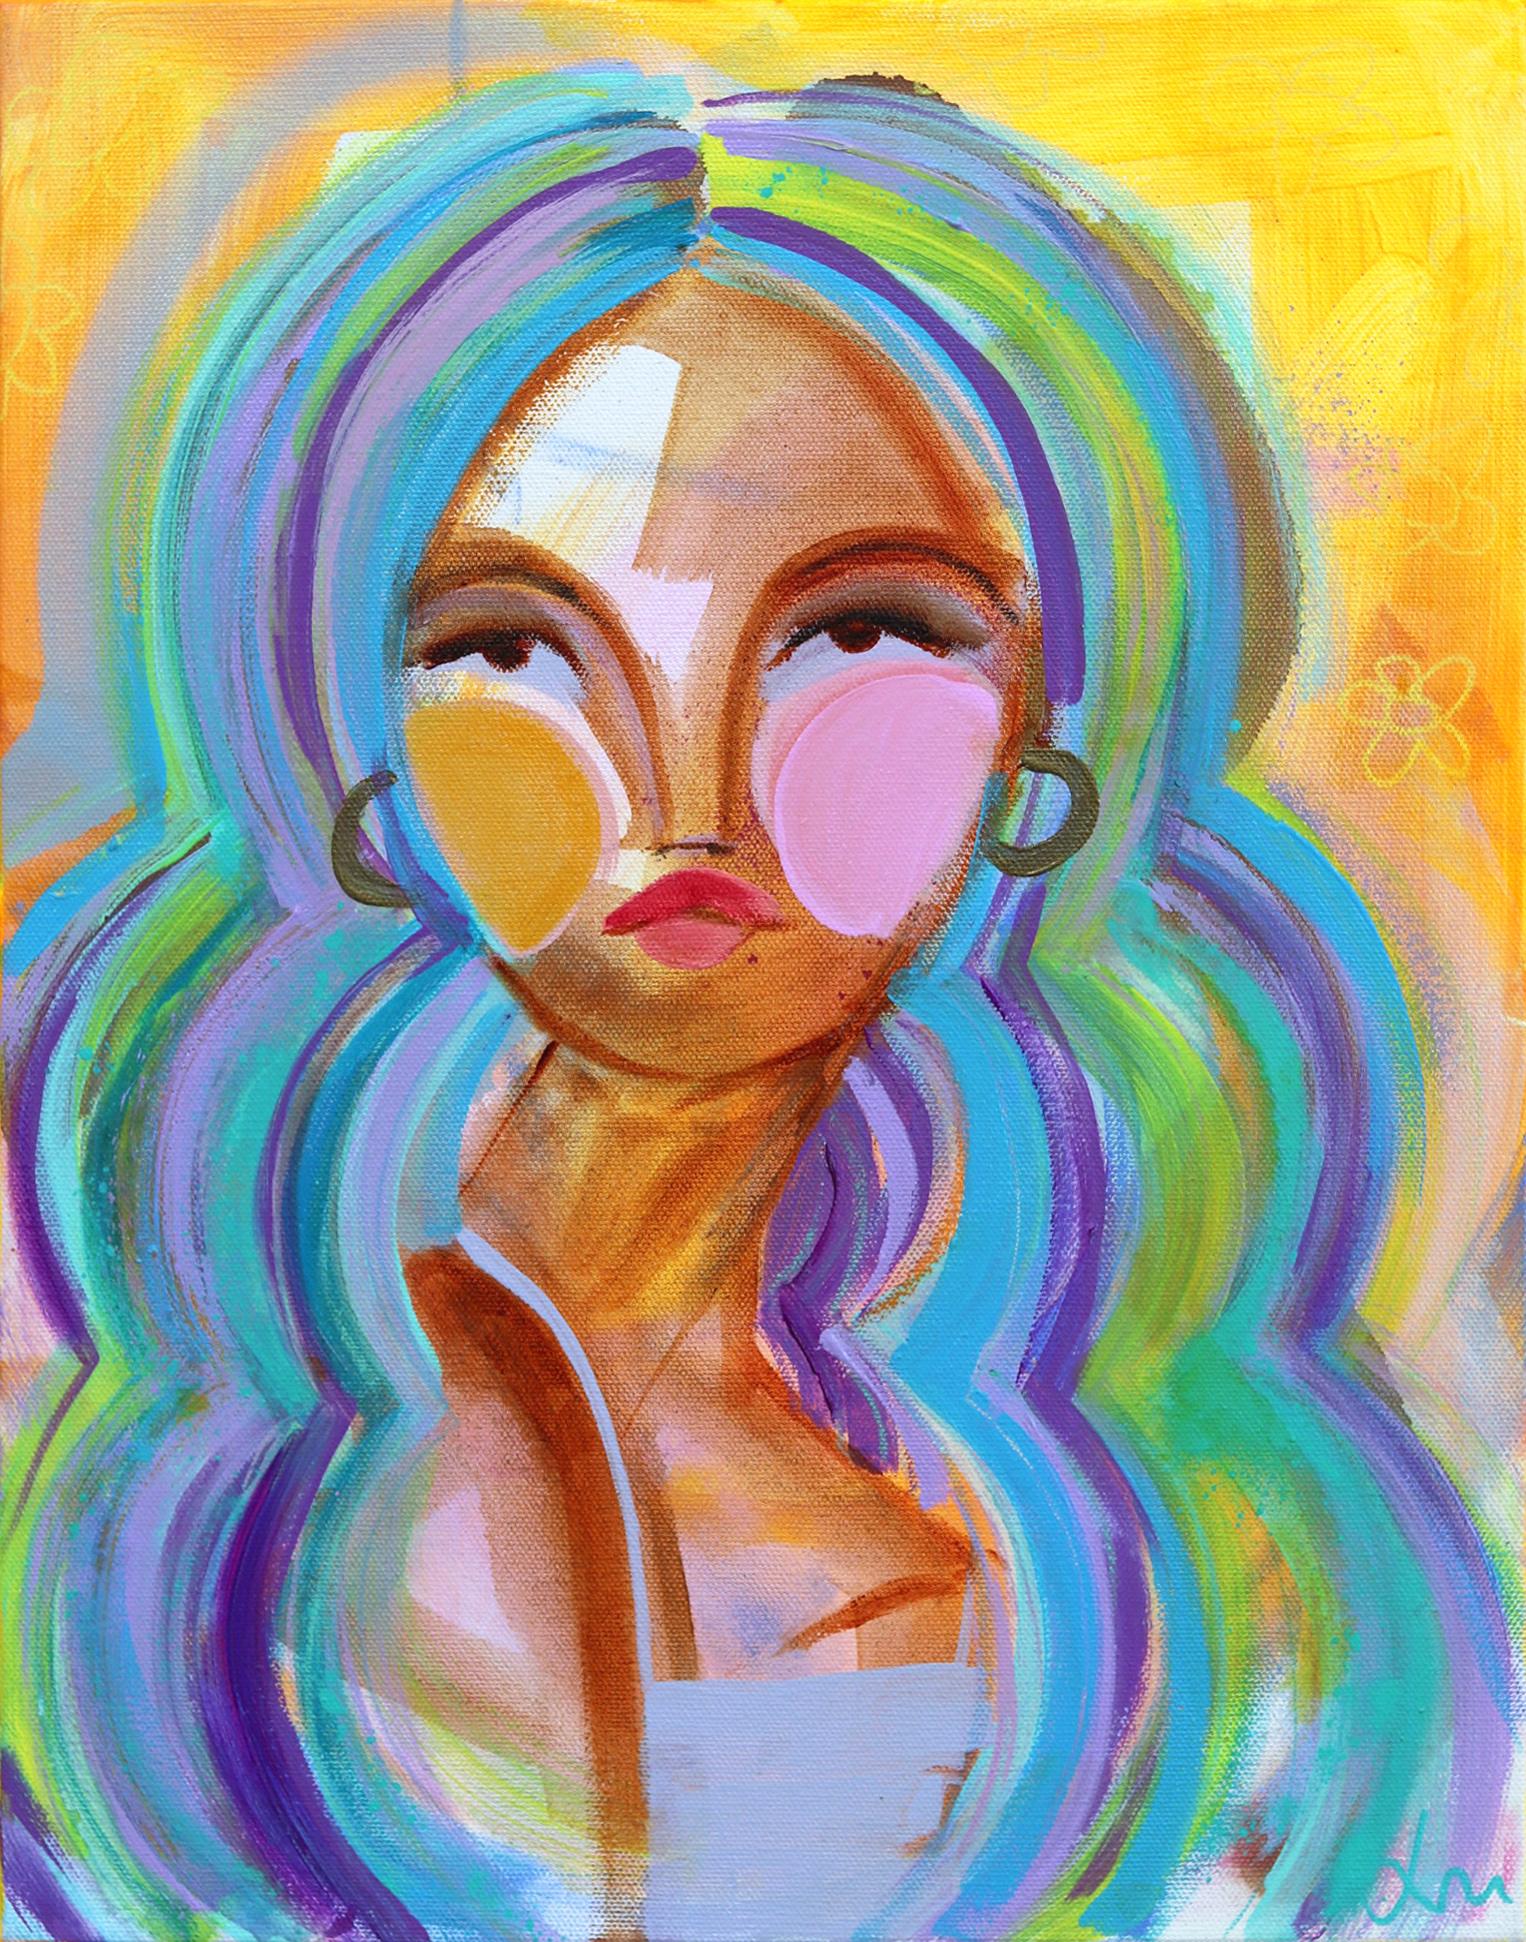 Lindsey McCord Portrait Painting - Indigo Bombshell - Colorful Abstract Figurative Portrait Original Painting